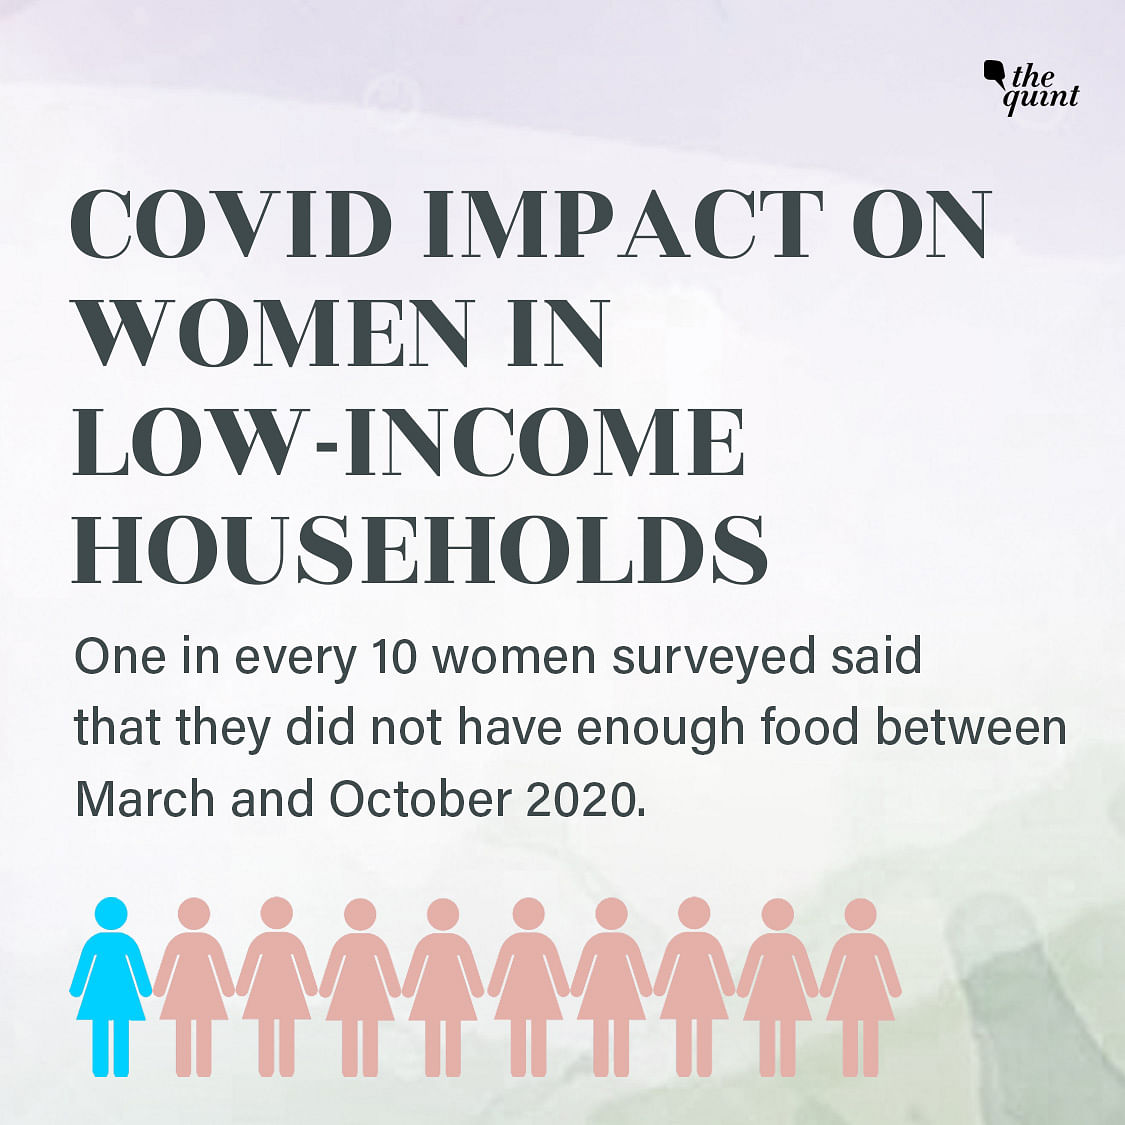 One in every 10 women surveyed said that they did not have enough food between March-October 2020.